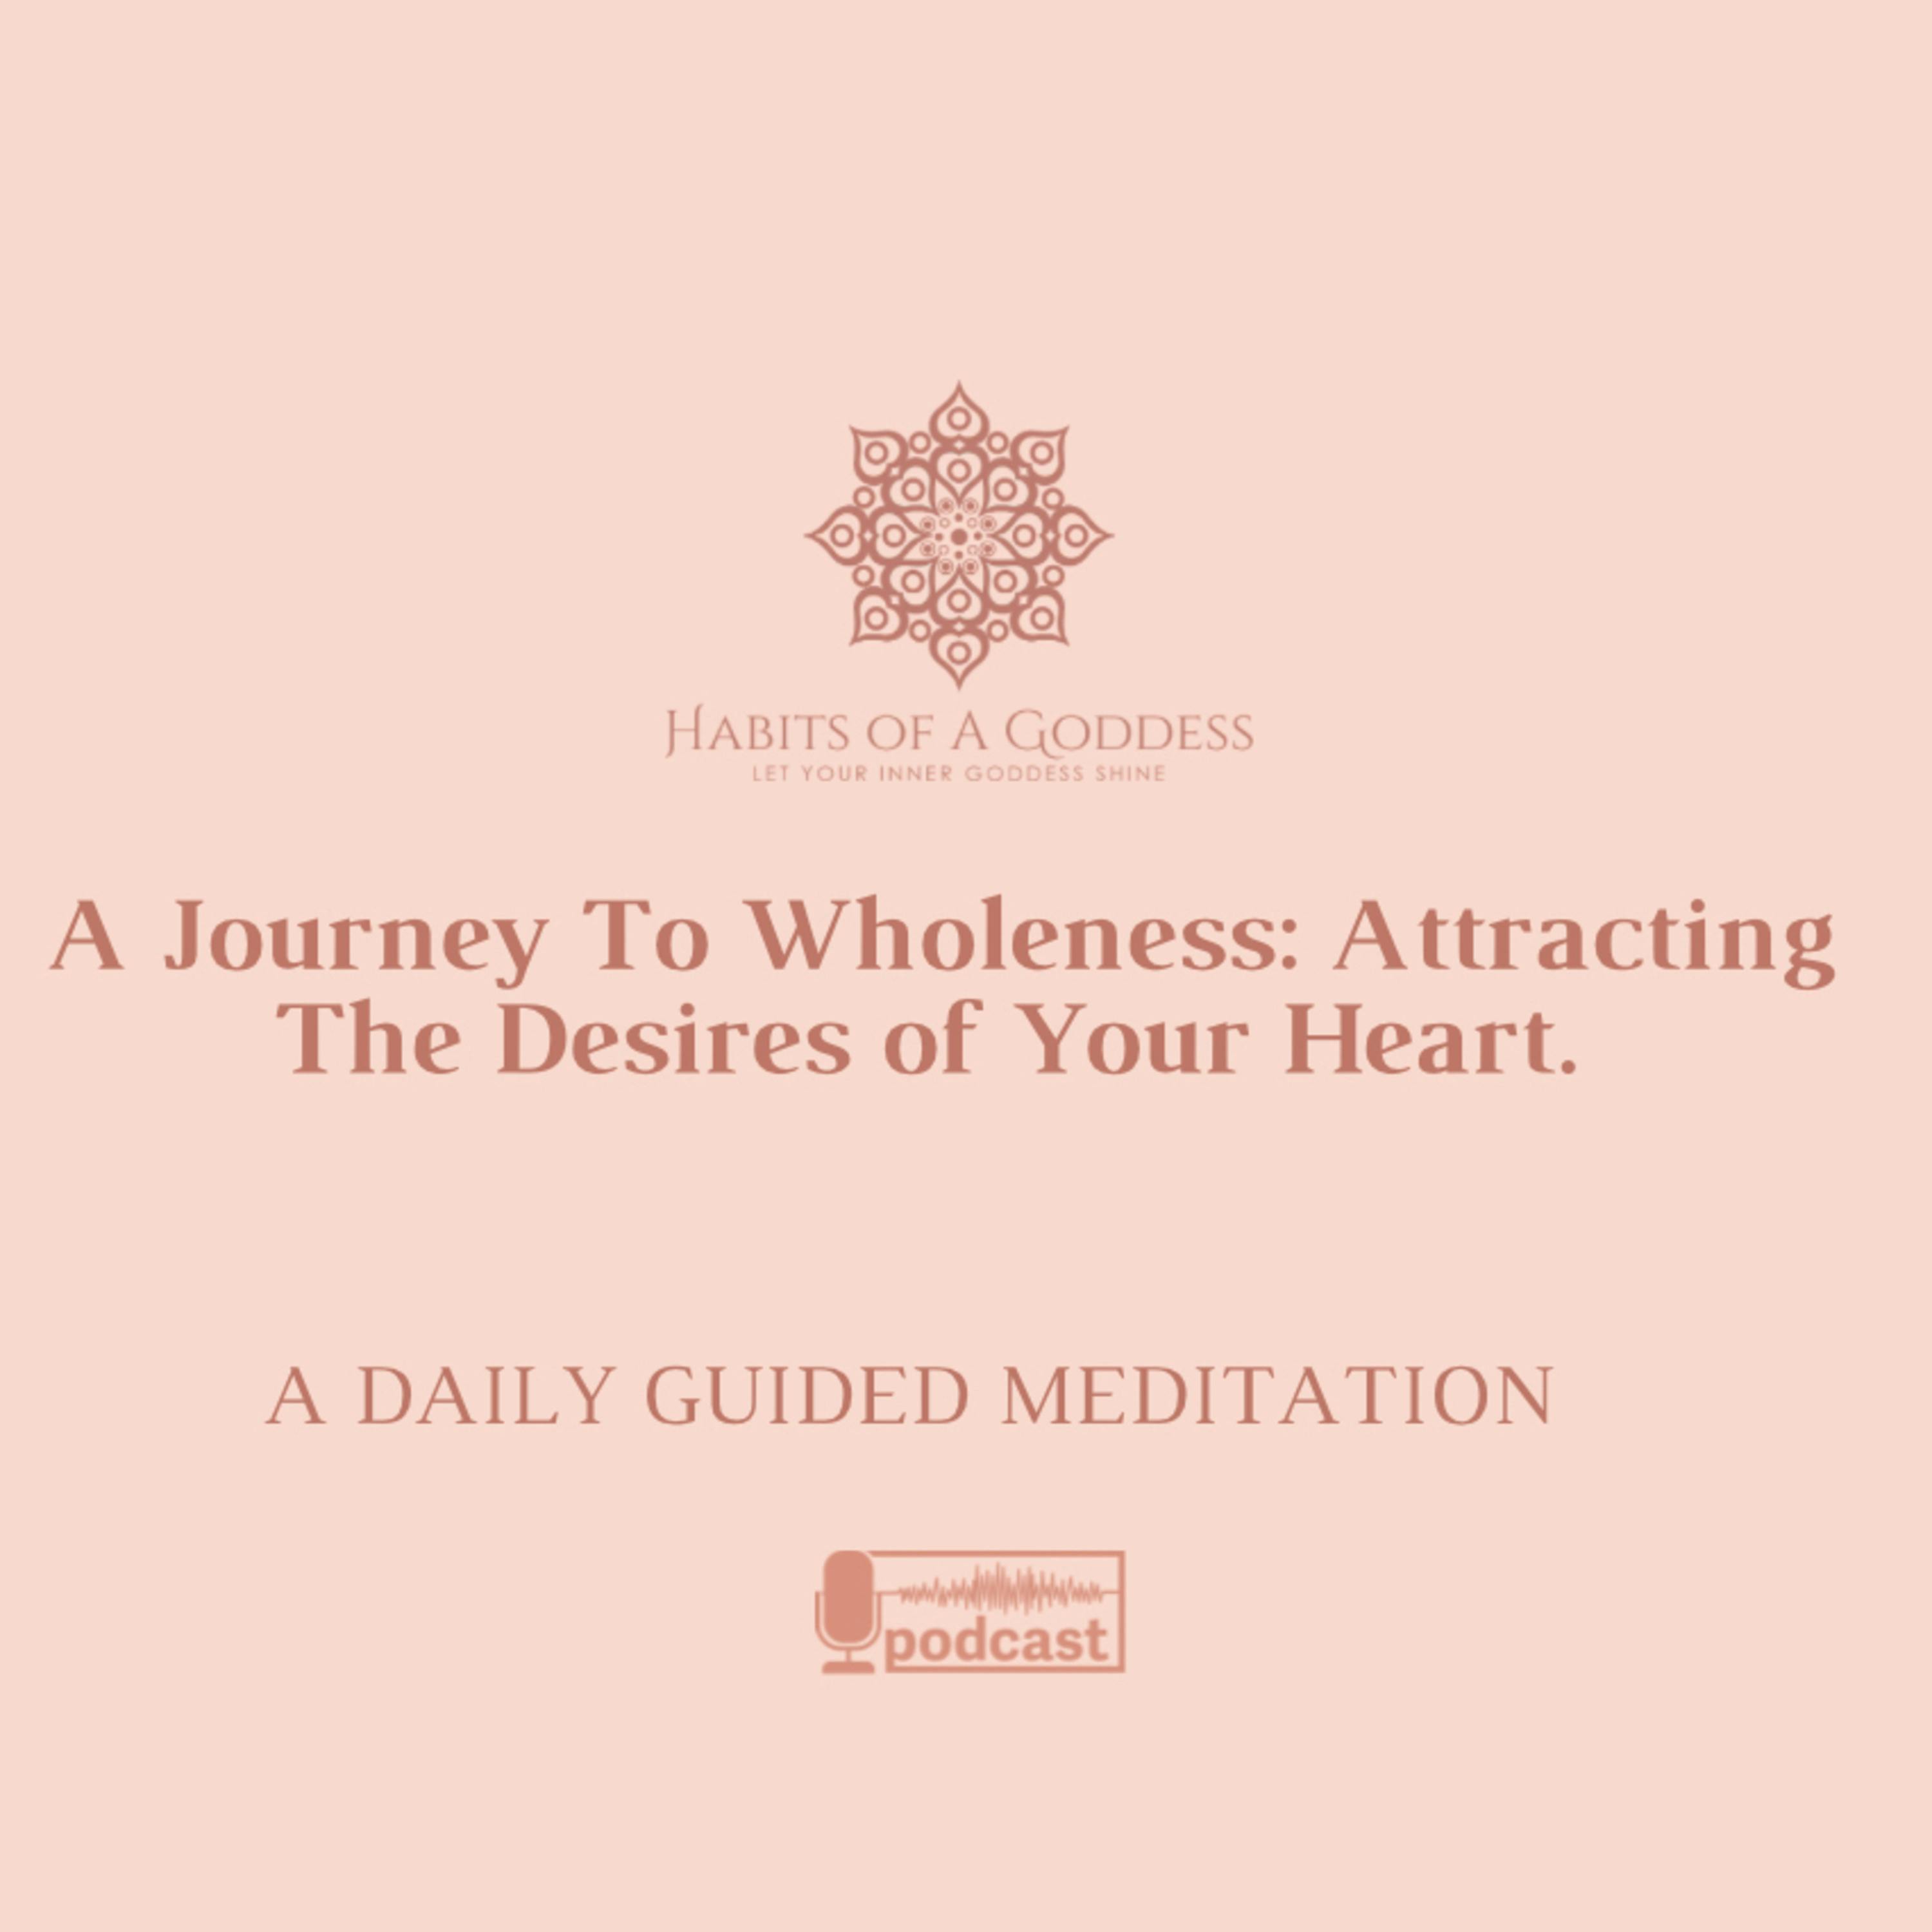 A Journey to Wholeness: Attracting the Desires of Your Heart | HABITS OF A GODDESS